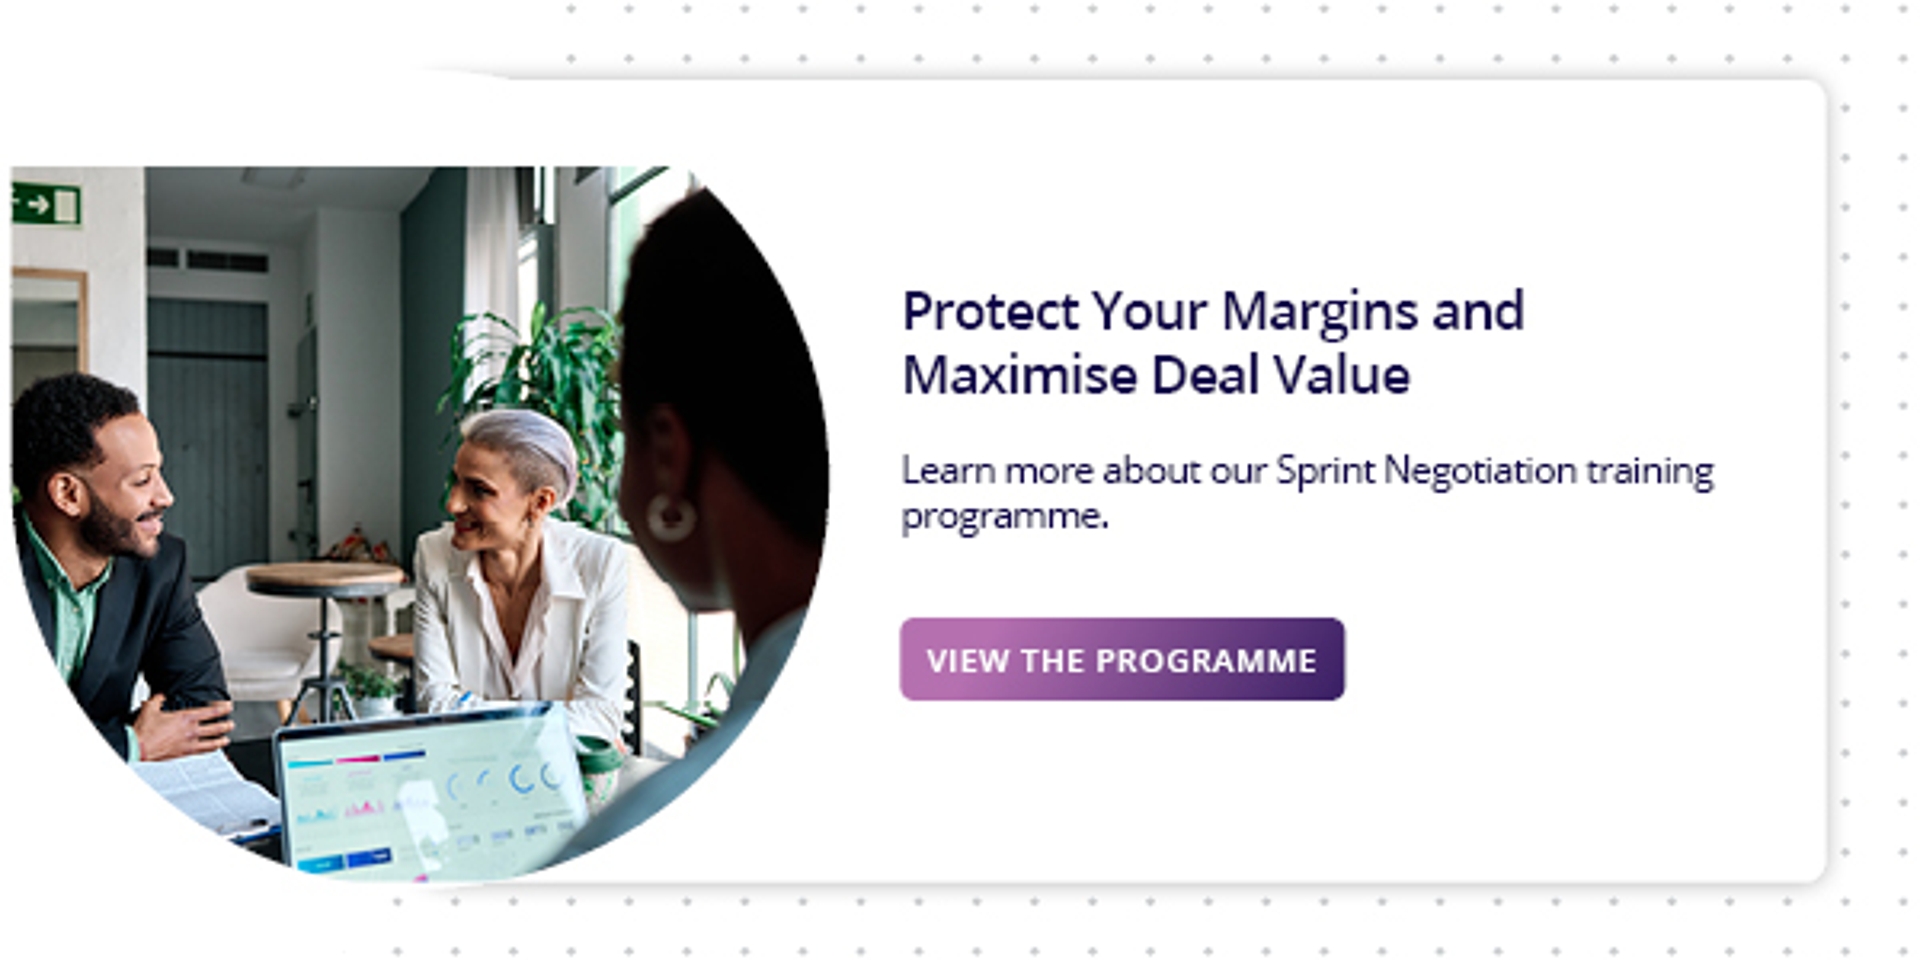 Learn about our Sprint Negotiations™ sales training programme